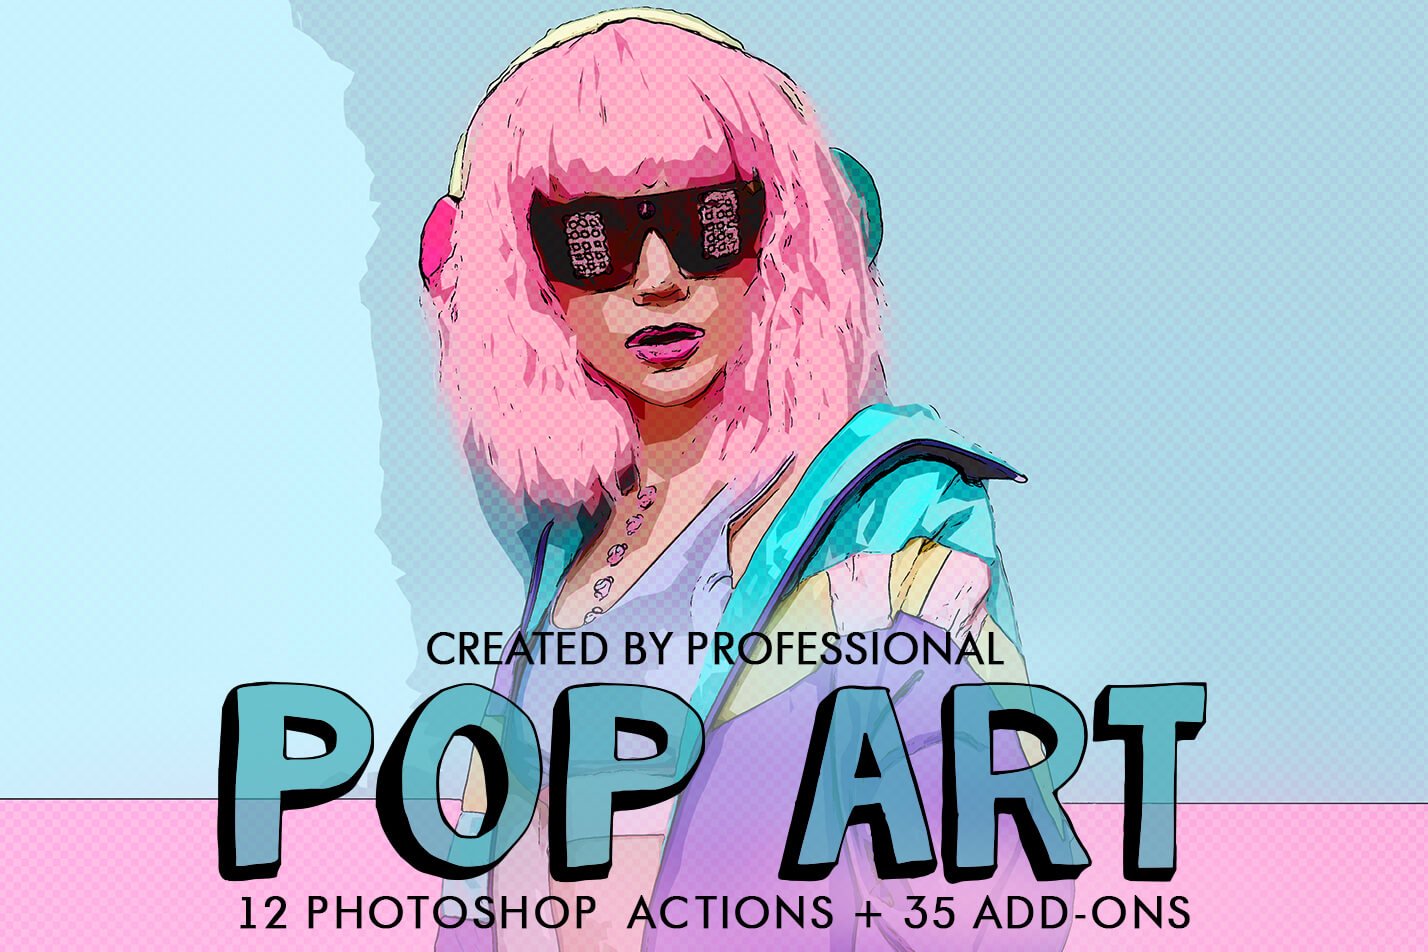 Pop Art Actions Photoshopcover image.